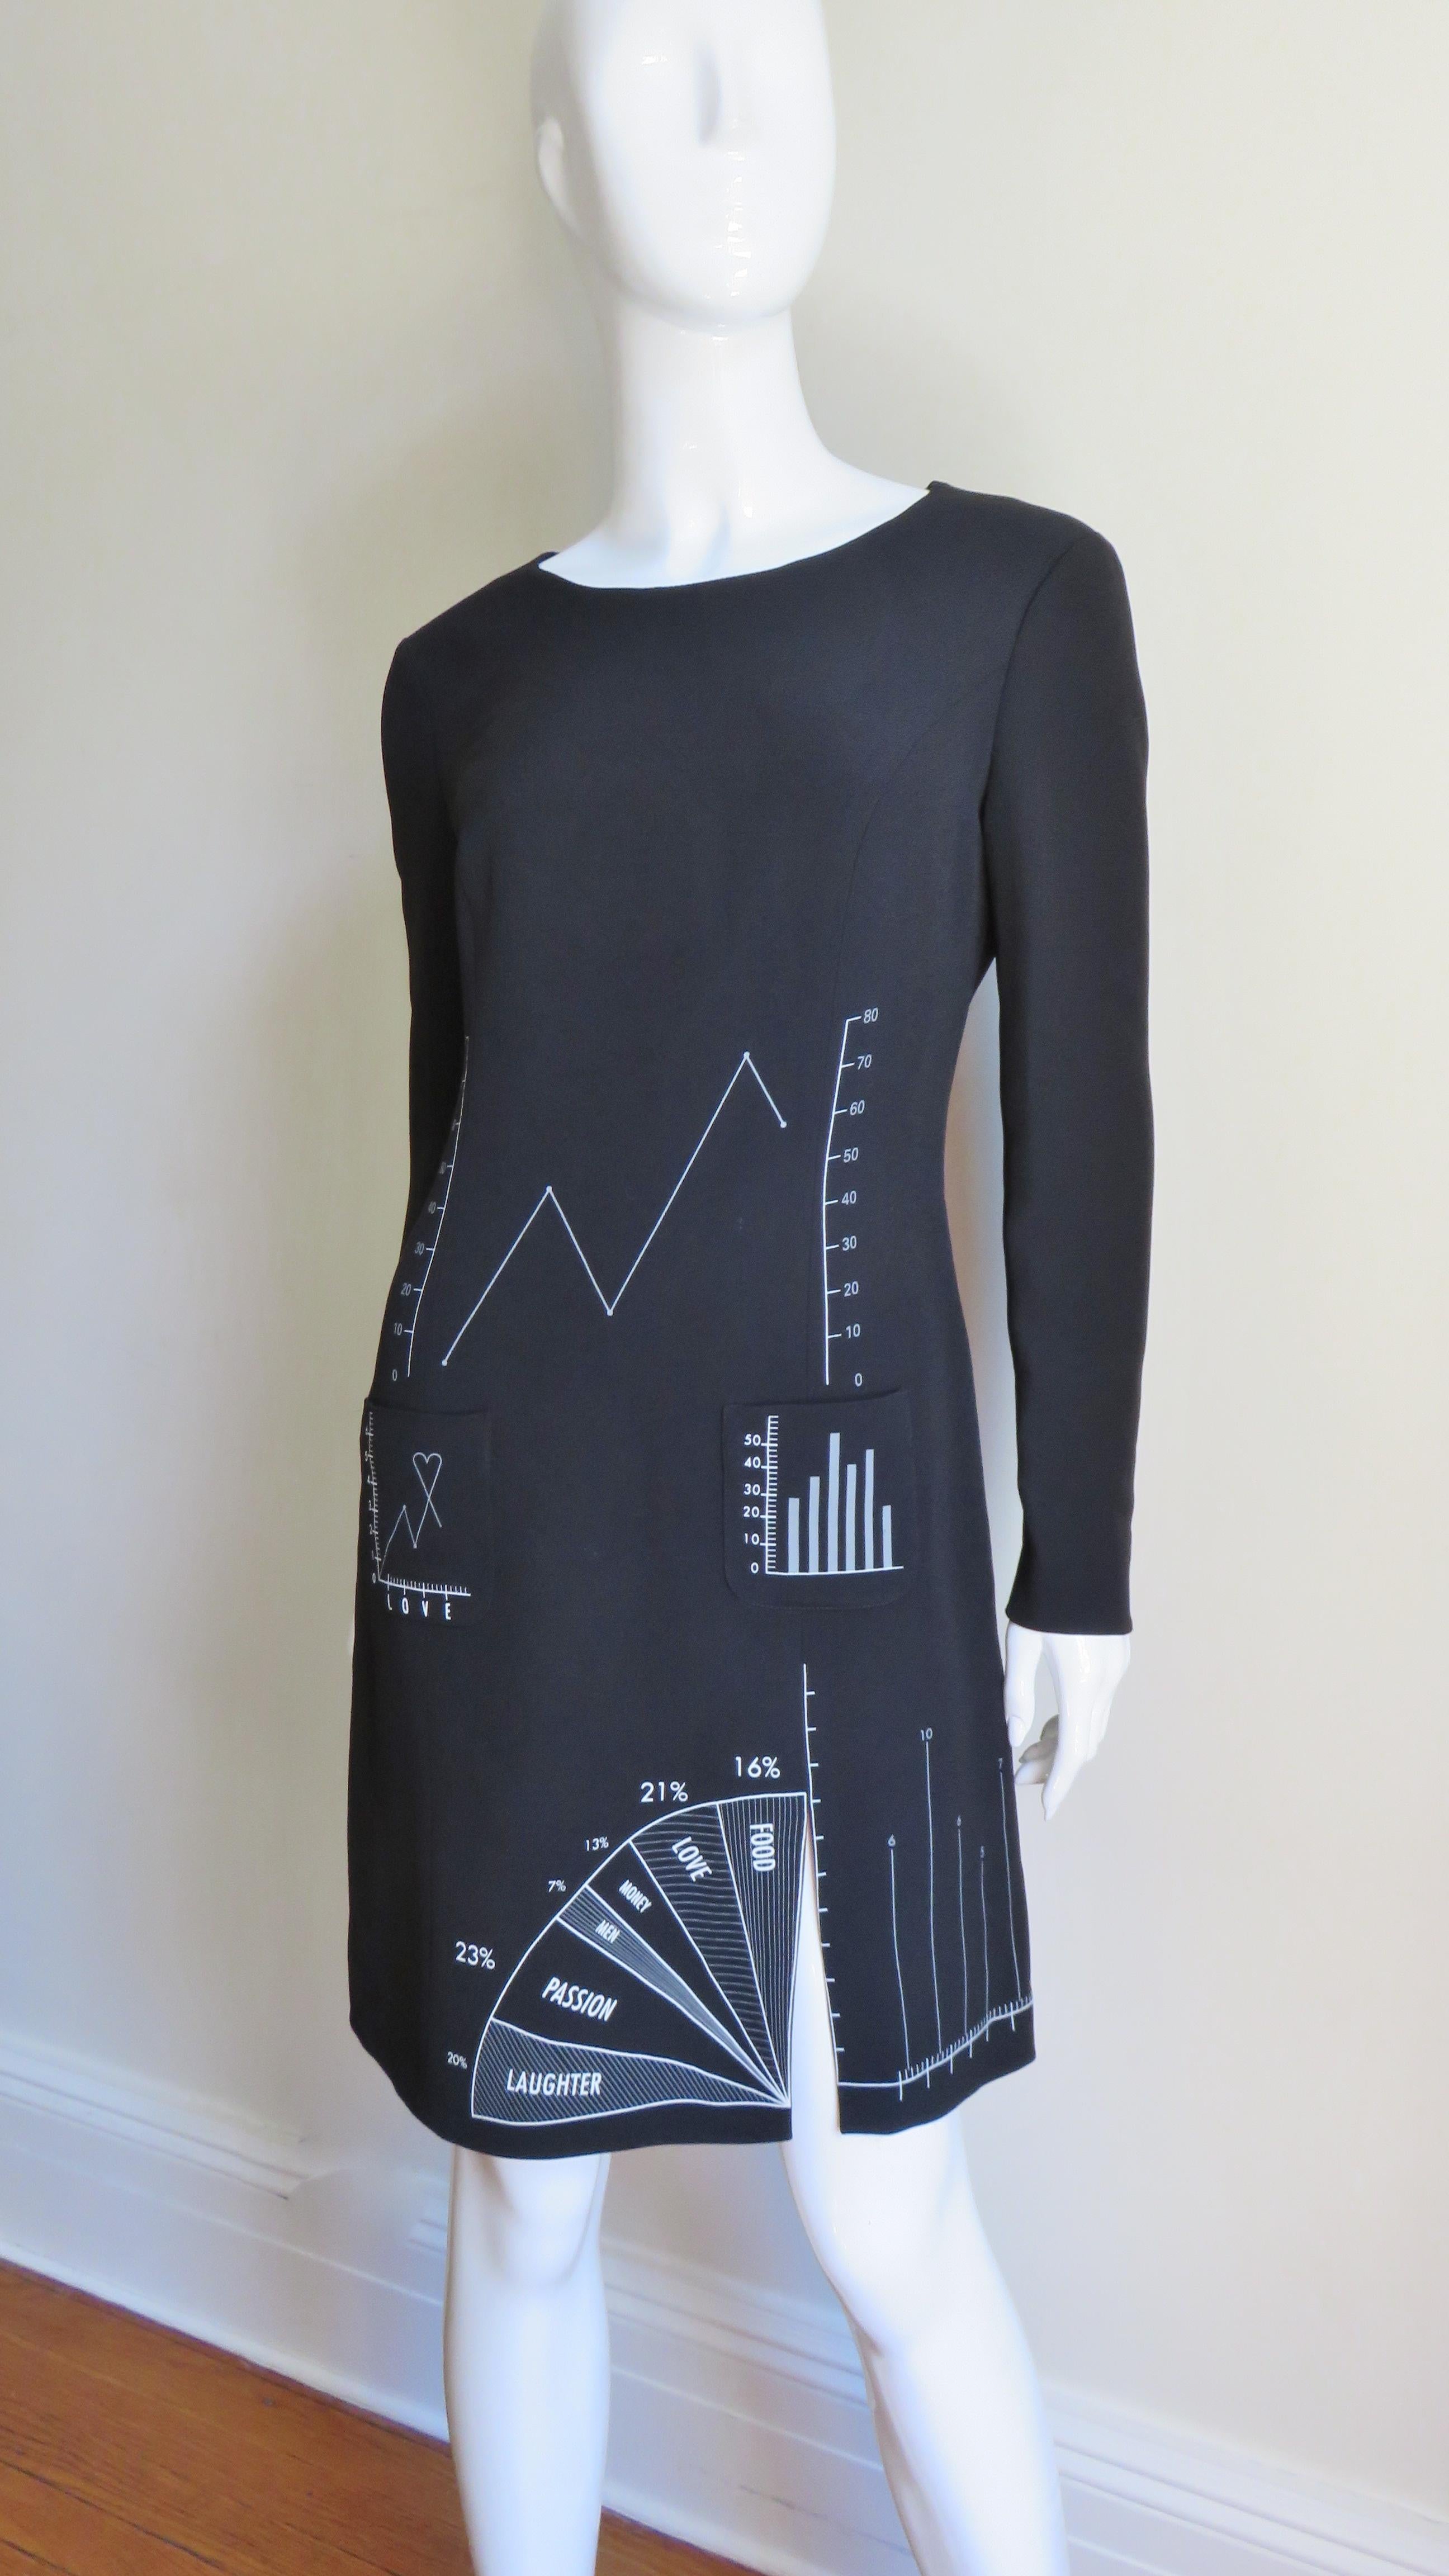 A fabulous black dress from Moschino.  It has long sleeves, a crew neck and great charts and graphs screen printed on the front and back in white.  It has 2 small patch pockets at the front hips and a small slit up one leg. It is fully lined and has